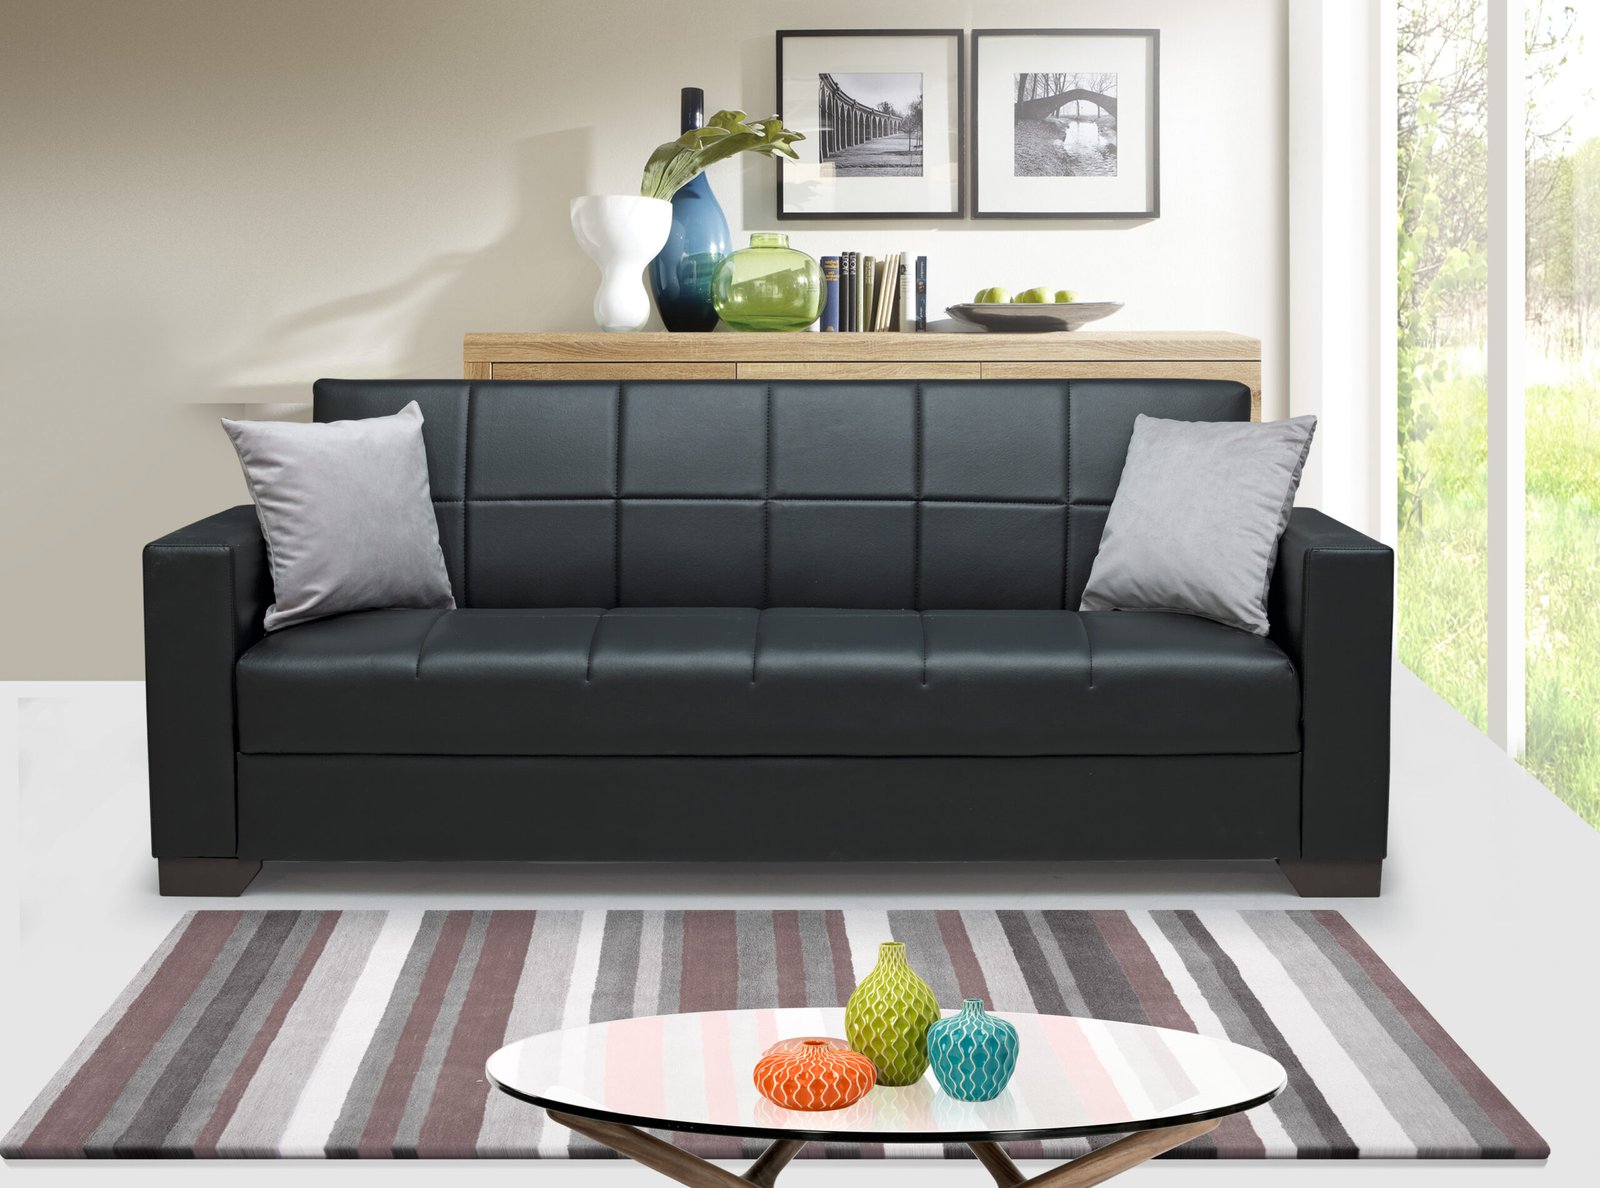 Vermont Black Leather Sofa Bed with Grey Pillows